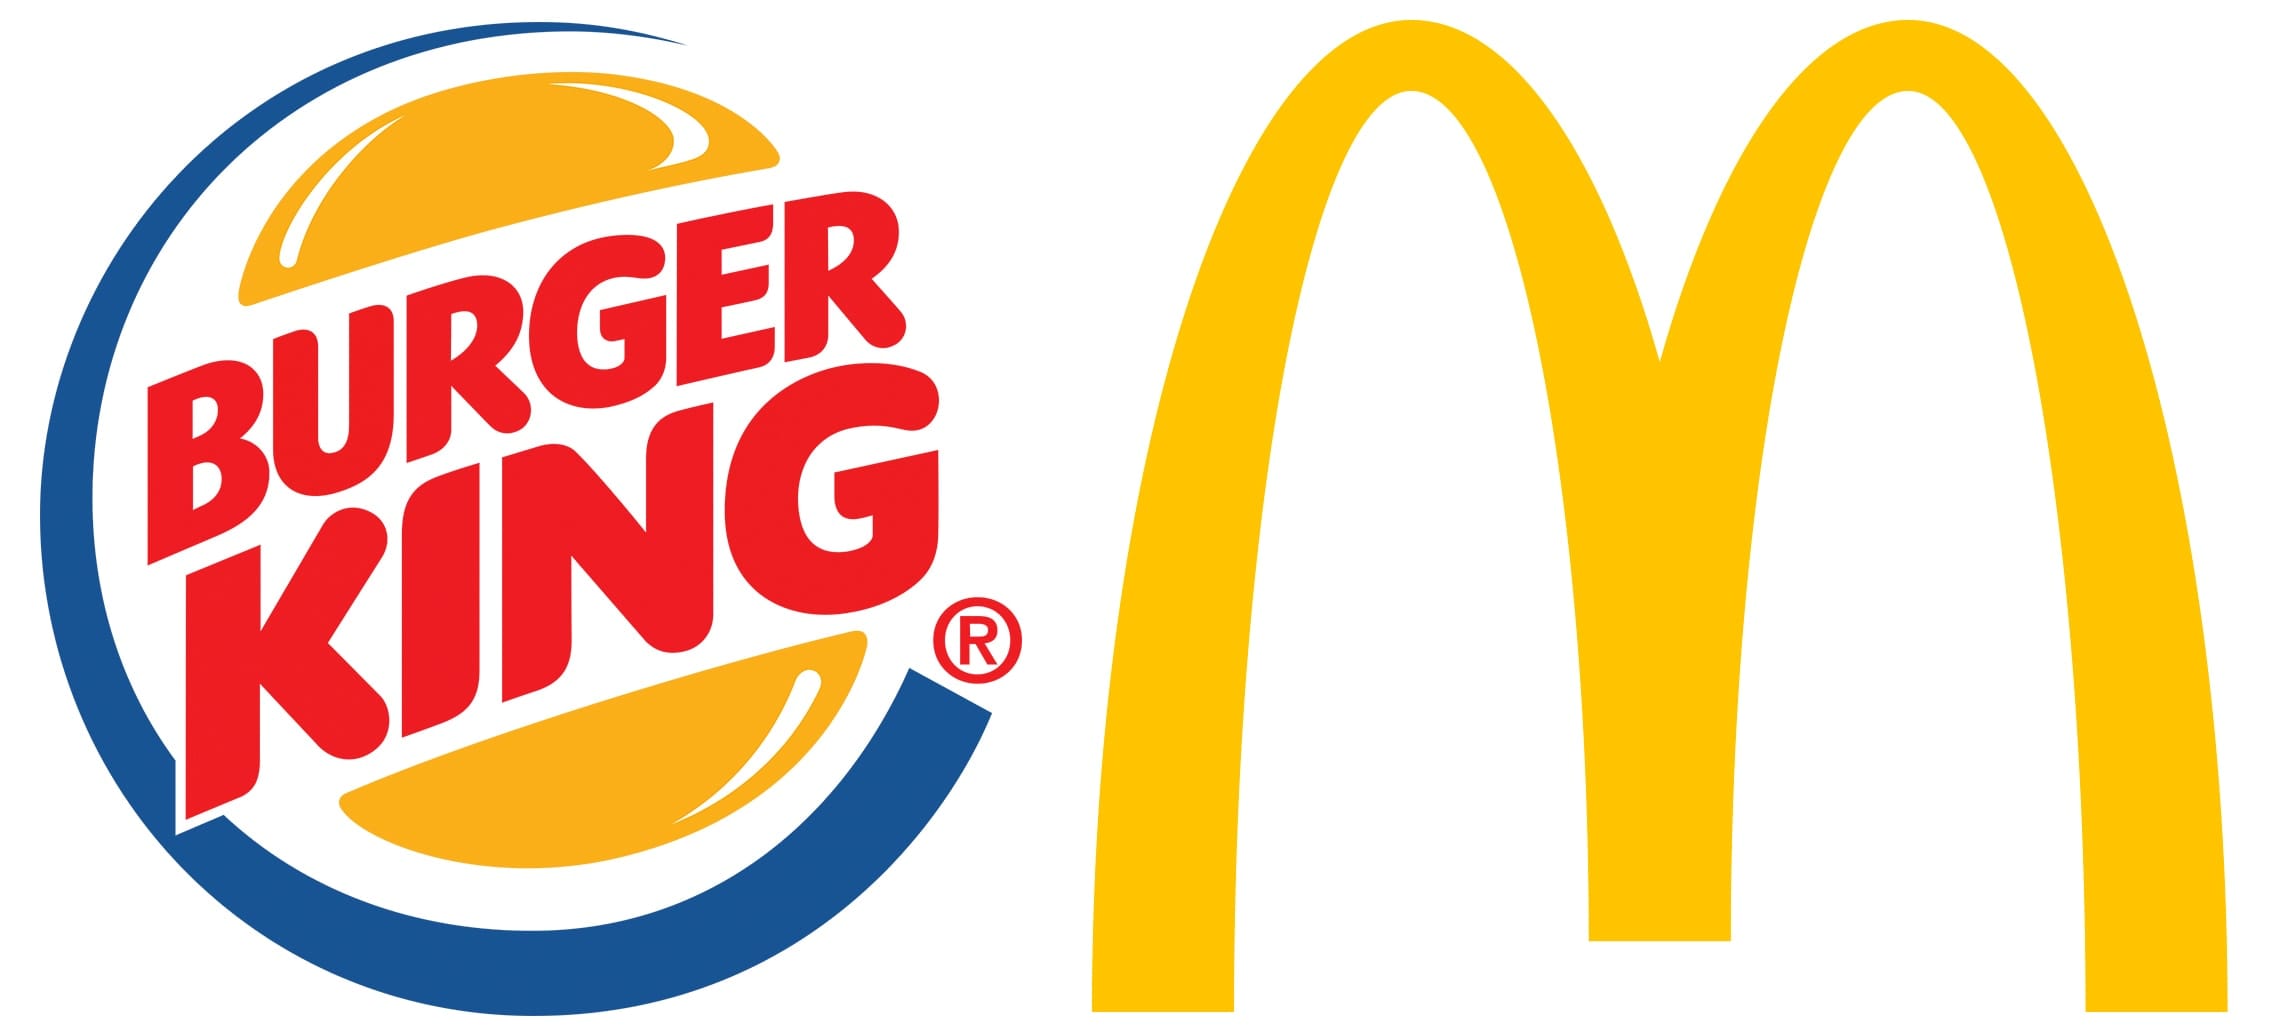 Mc Donalds and Burger King – ads with Google, YAK Agency Insights